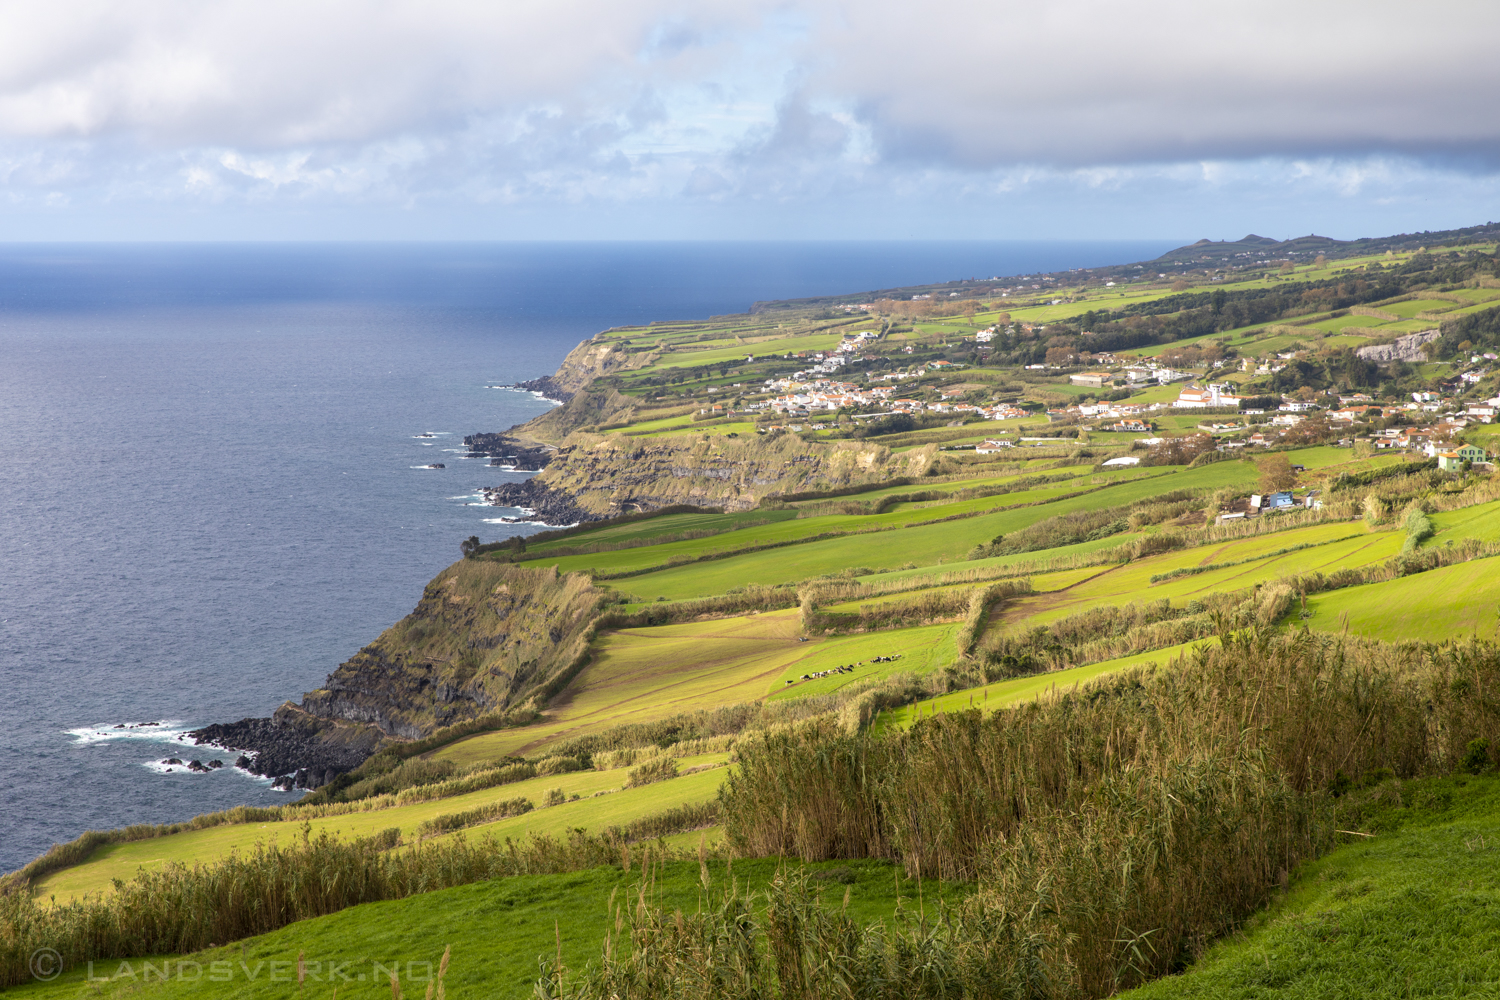 São Miguel, Azores. (Canon EOS 5D Mark IV / Canon EF 24-70mm f/2.8 L II USM)